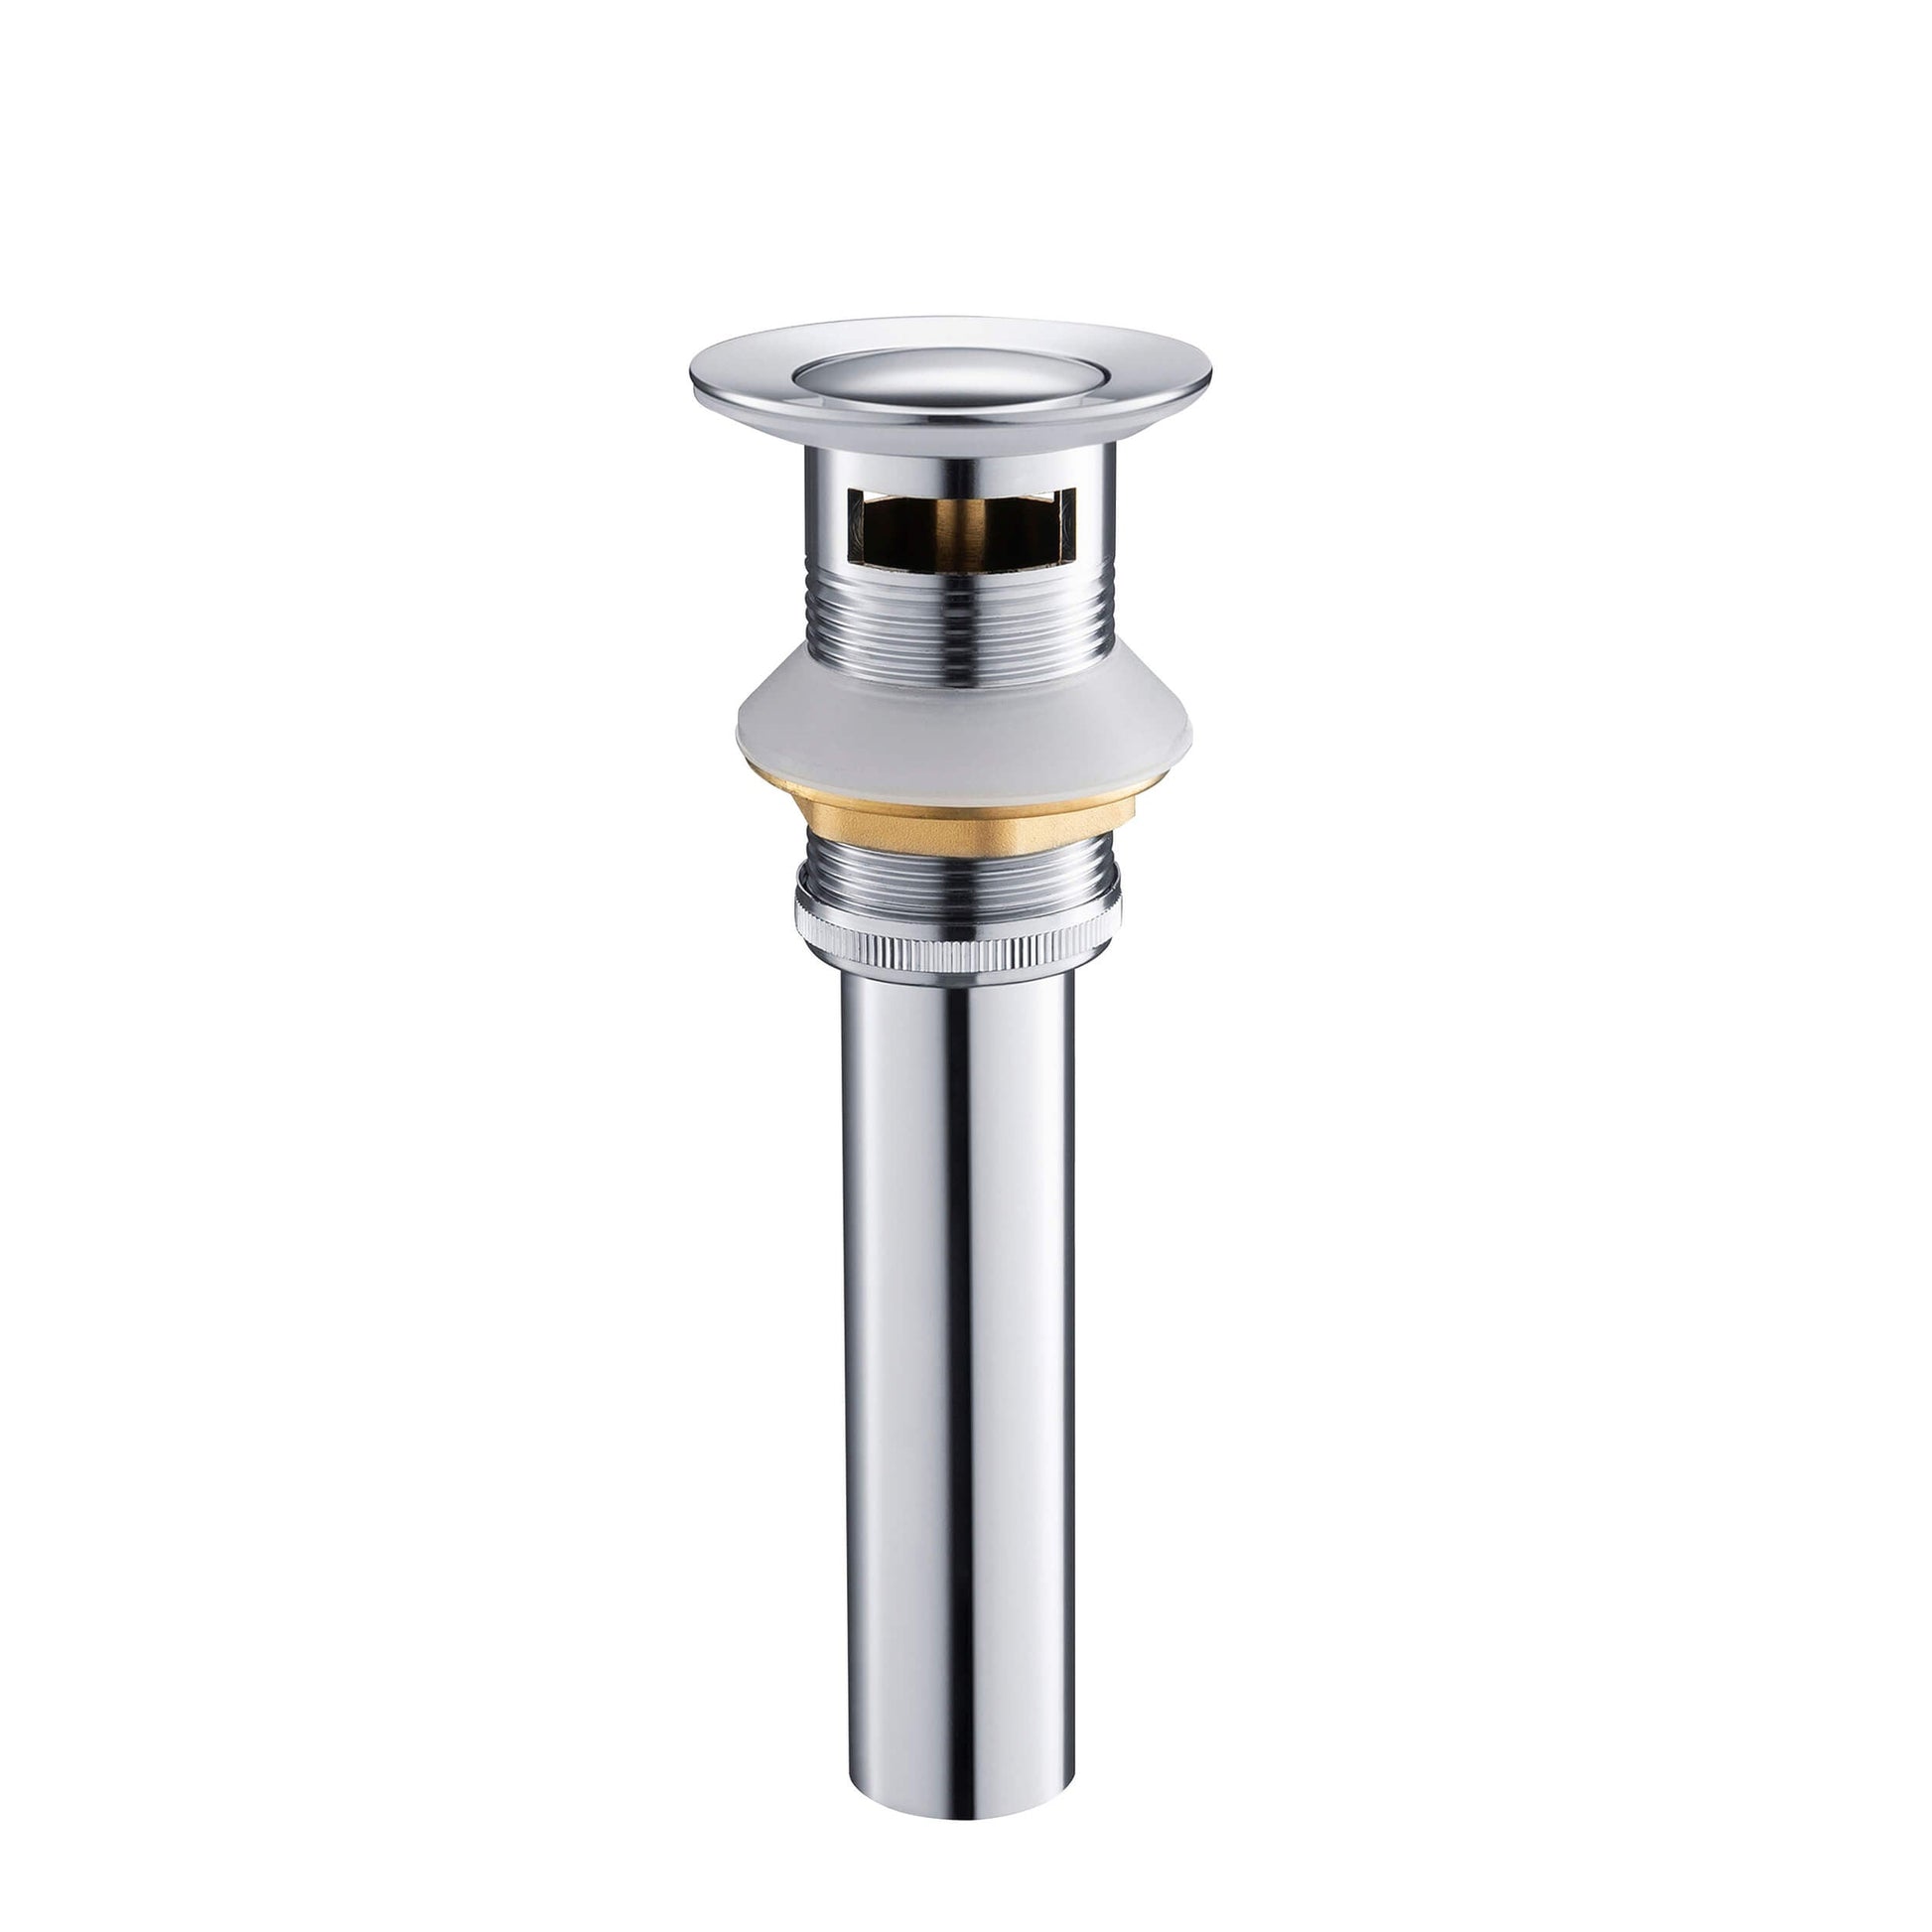 KIBI Brass Bathroom Sink Pop-Up Drain Stopper Small Cover With Overflow in Chrome Finish